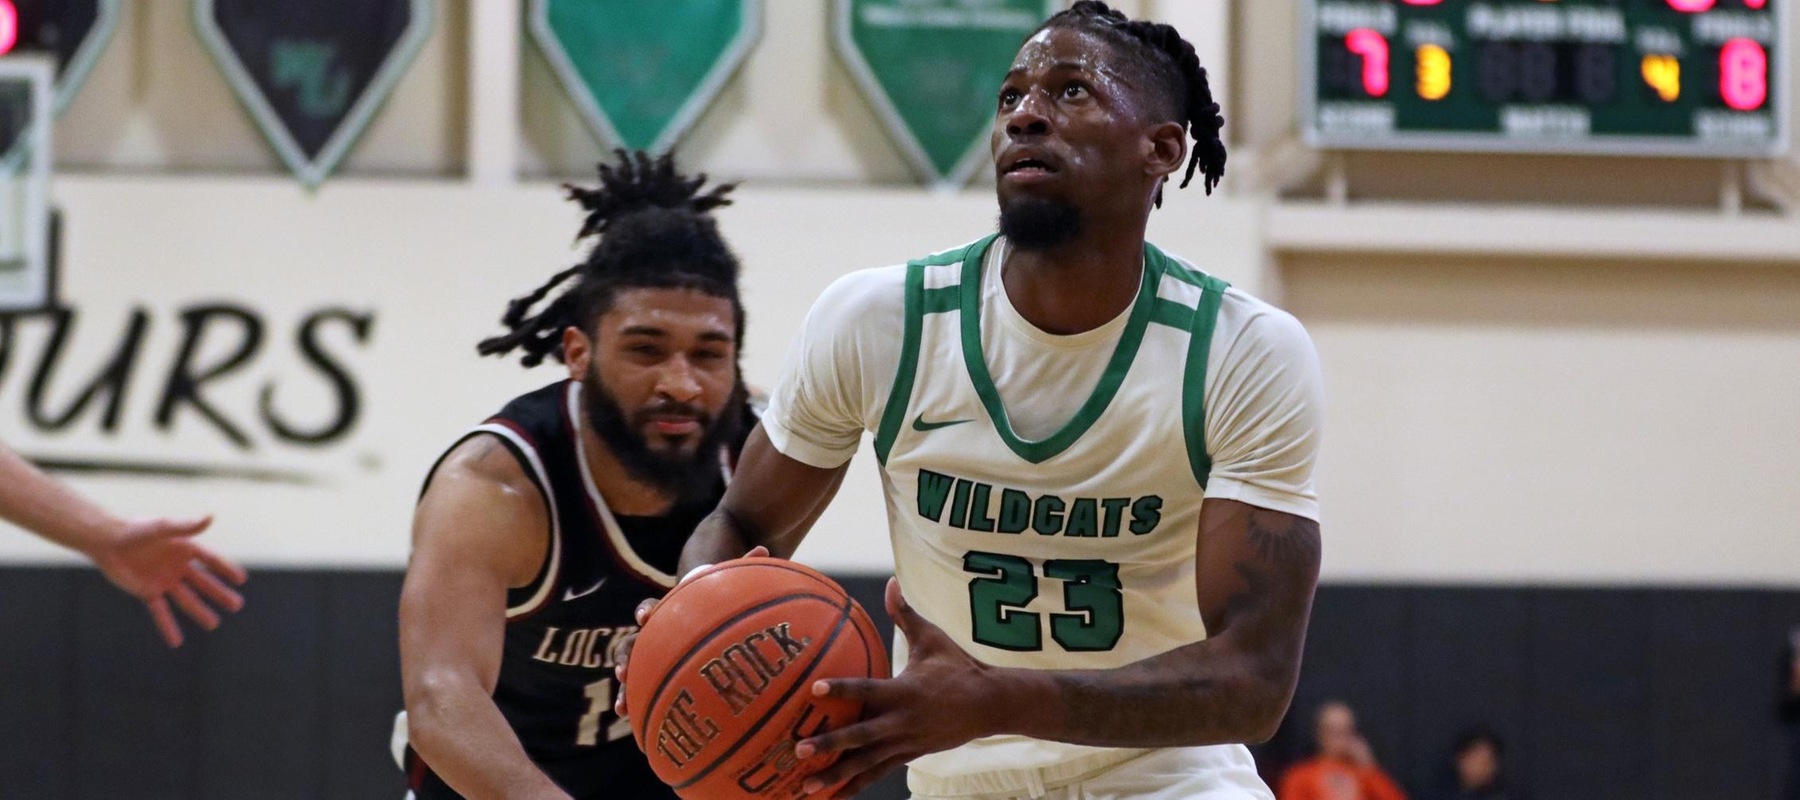 Photo of Amiri Stewart who led the Wildcats with 23 points on 8-of-10 shooting against Lock Haven. Copyright 2023; Wilmington University. All rights reserved. Photo by Dan Lauletta. December 9, 2023 vs. Lock Haven.